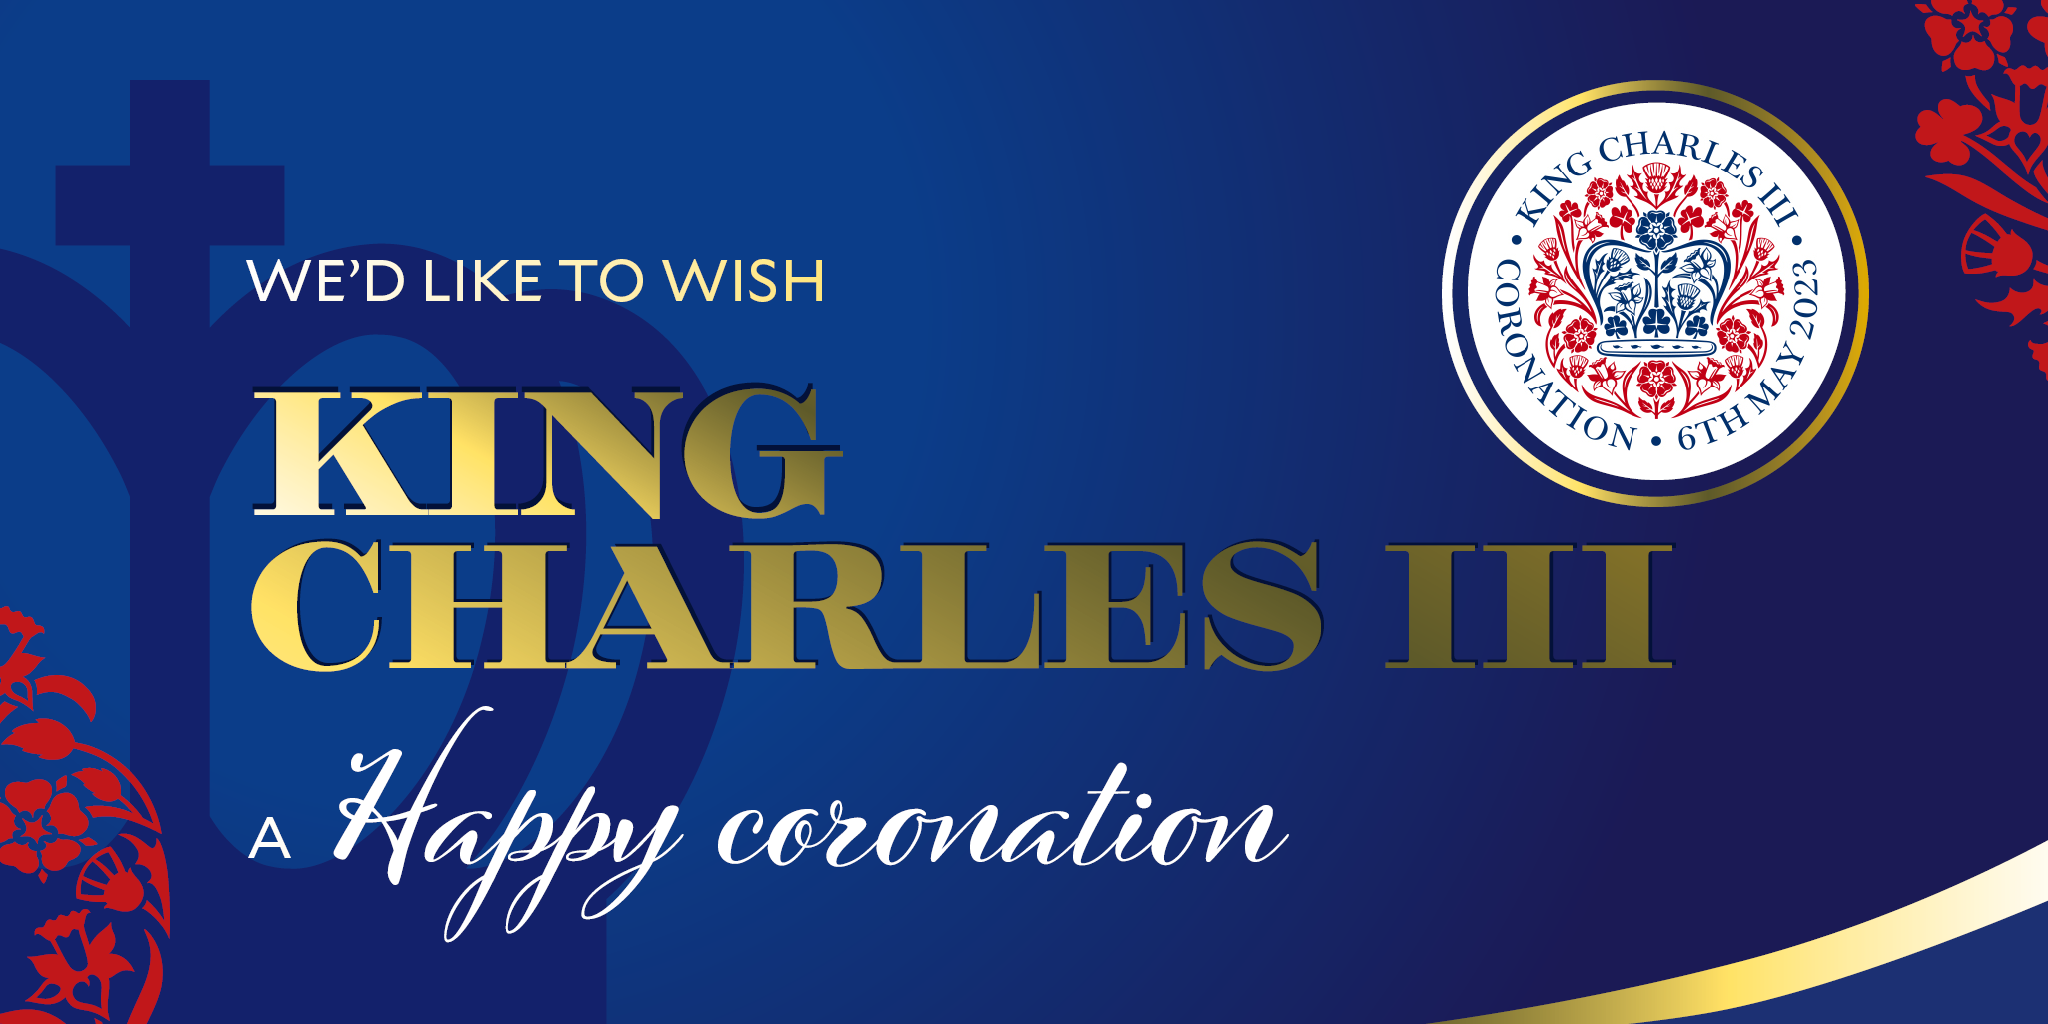 we'd like to wish king charles 3rd a happy coronation